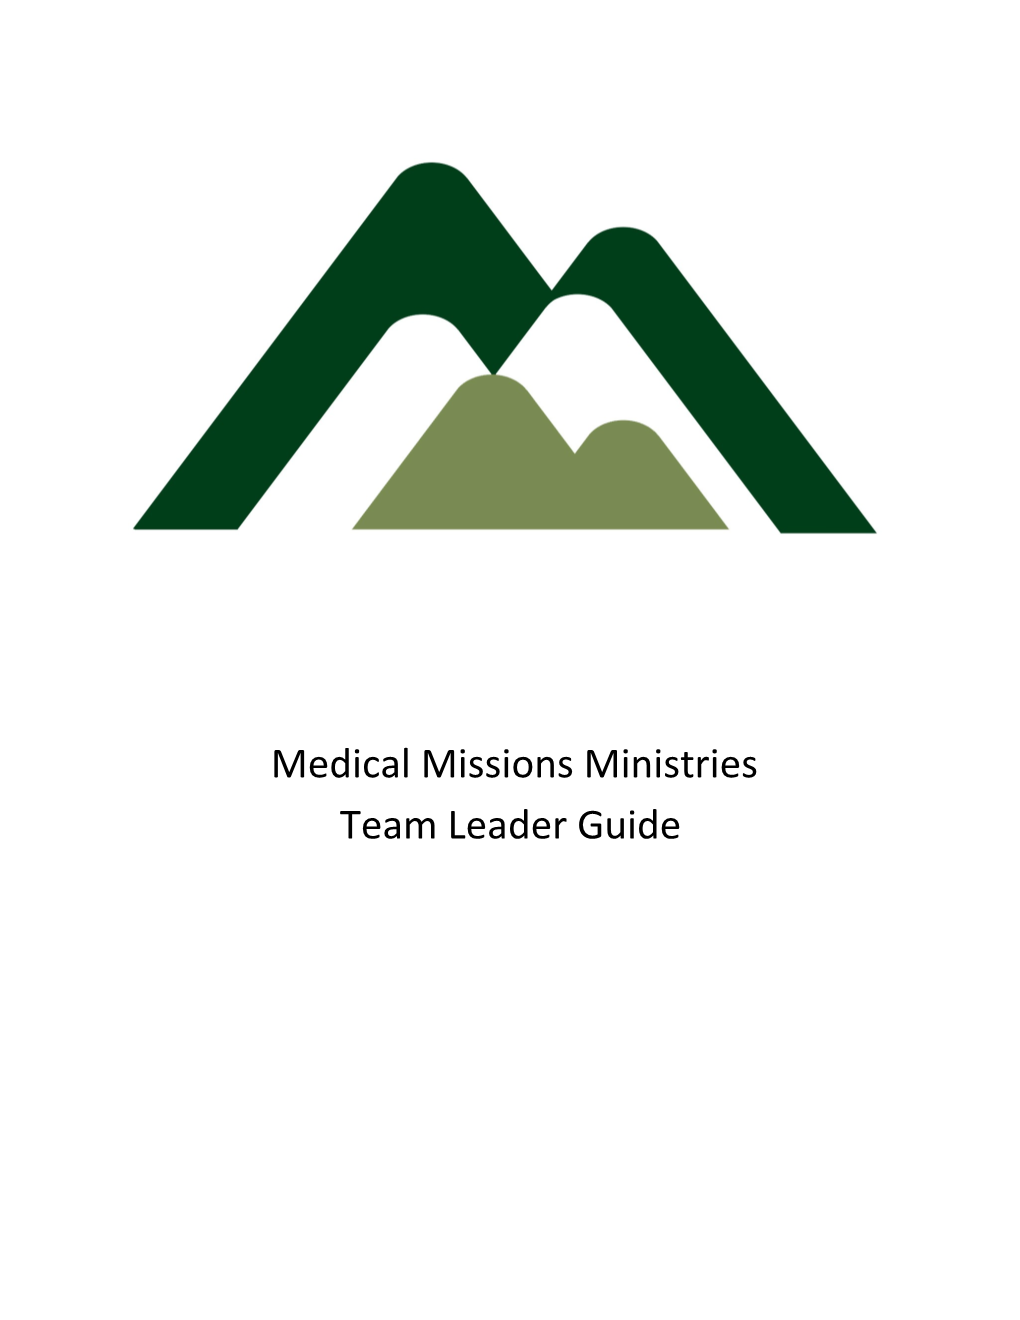 Medical Missions Ministries Team Leader Guide (As of 3/27/18)